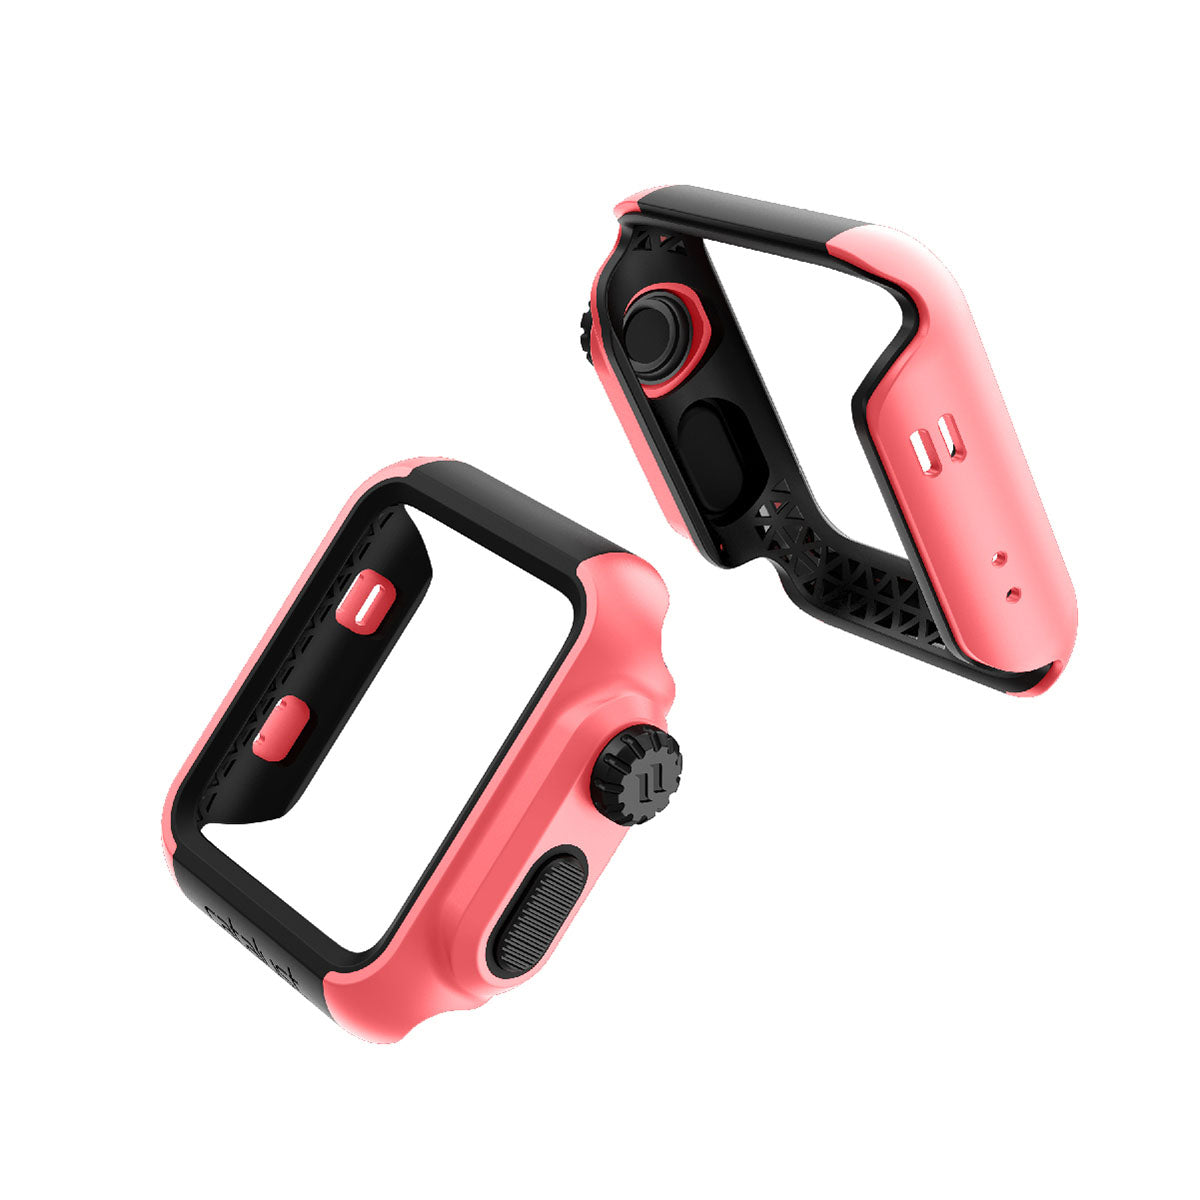 catalyst apple watch series 3 2 42mm impact protection case views of all the sides of the impact protection case coral